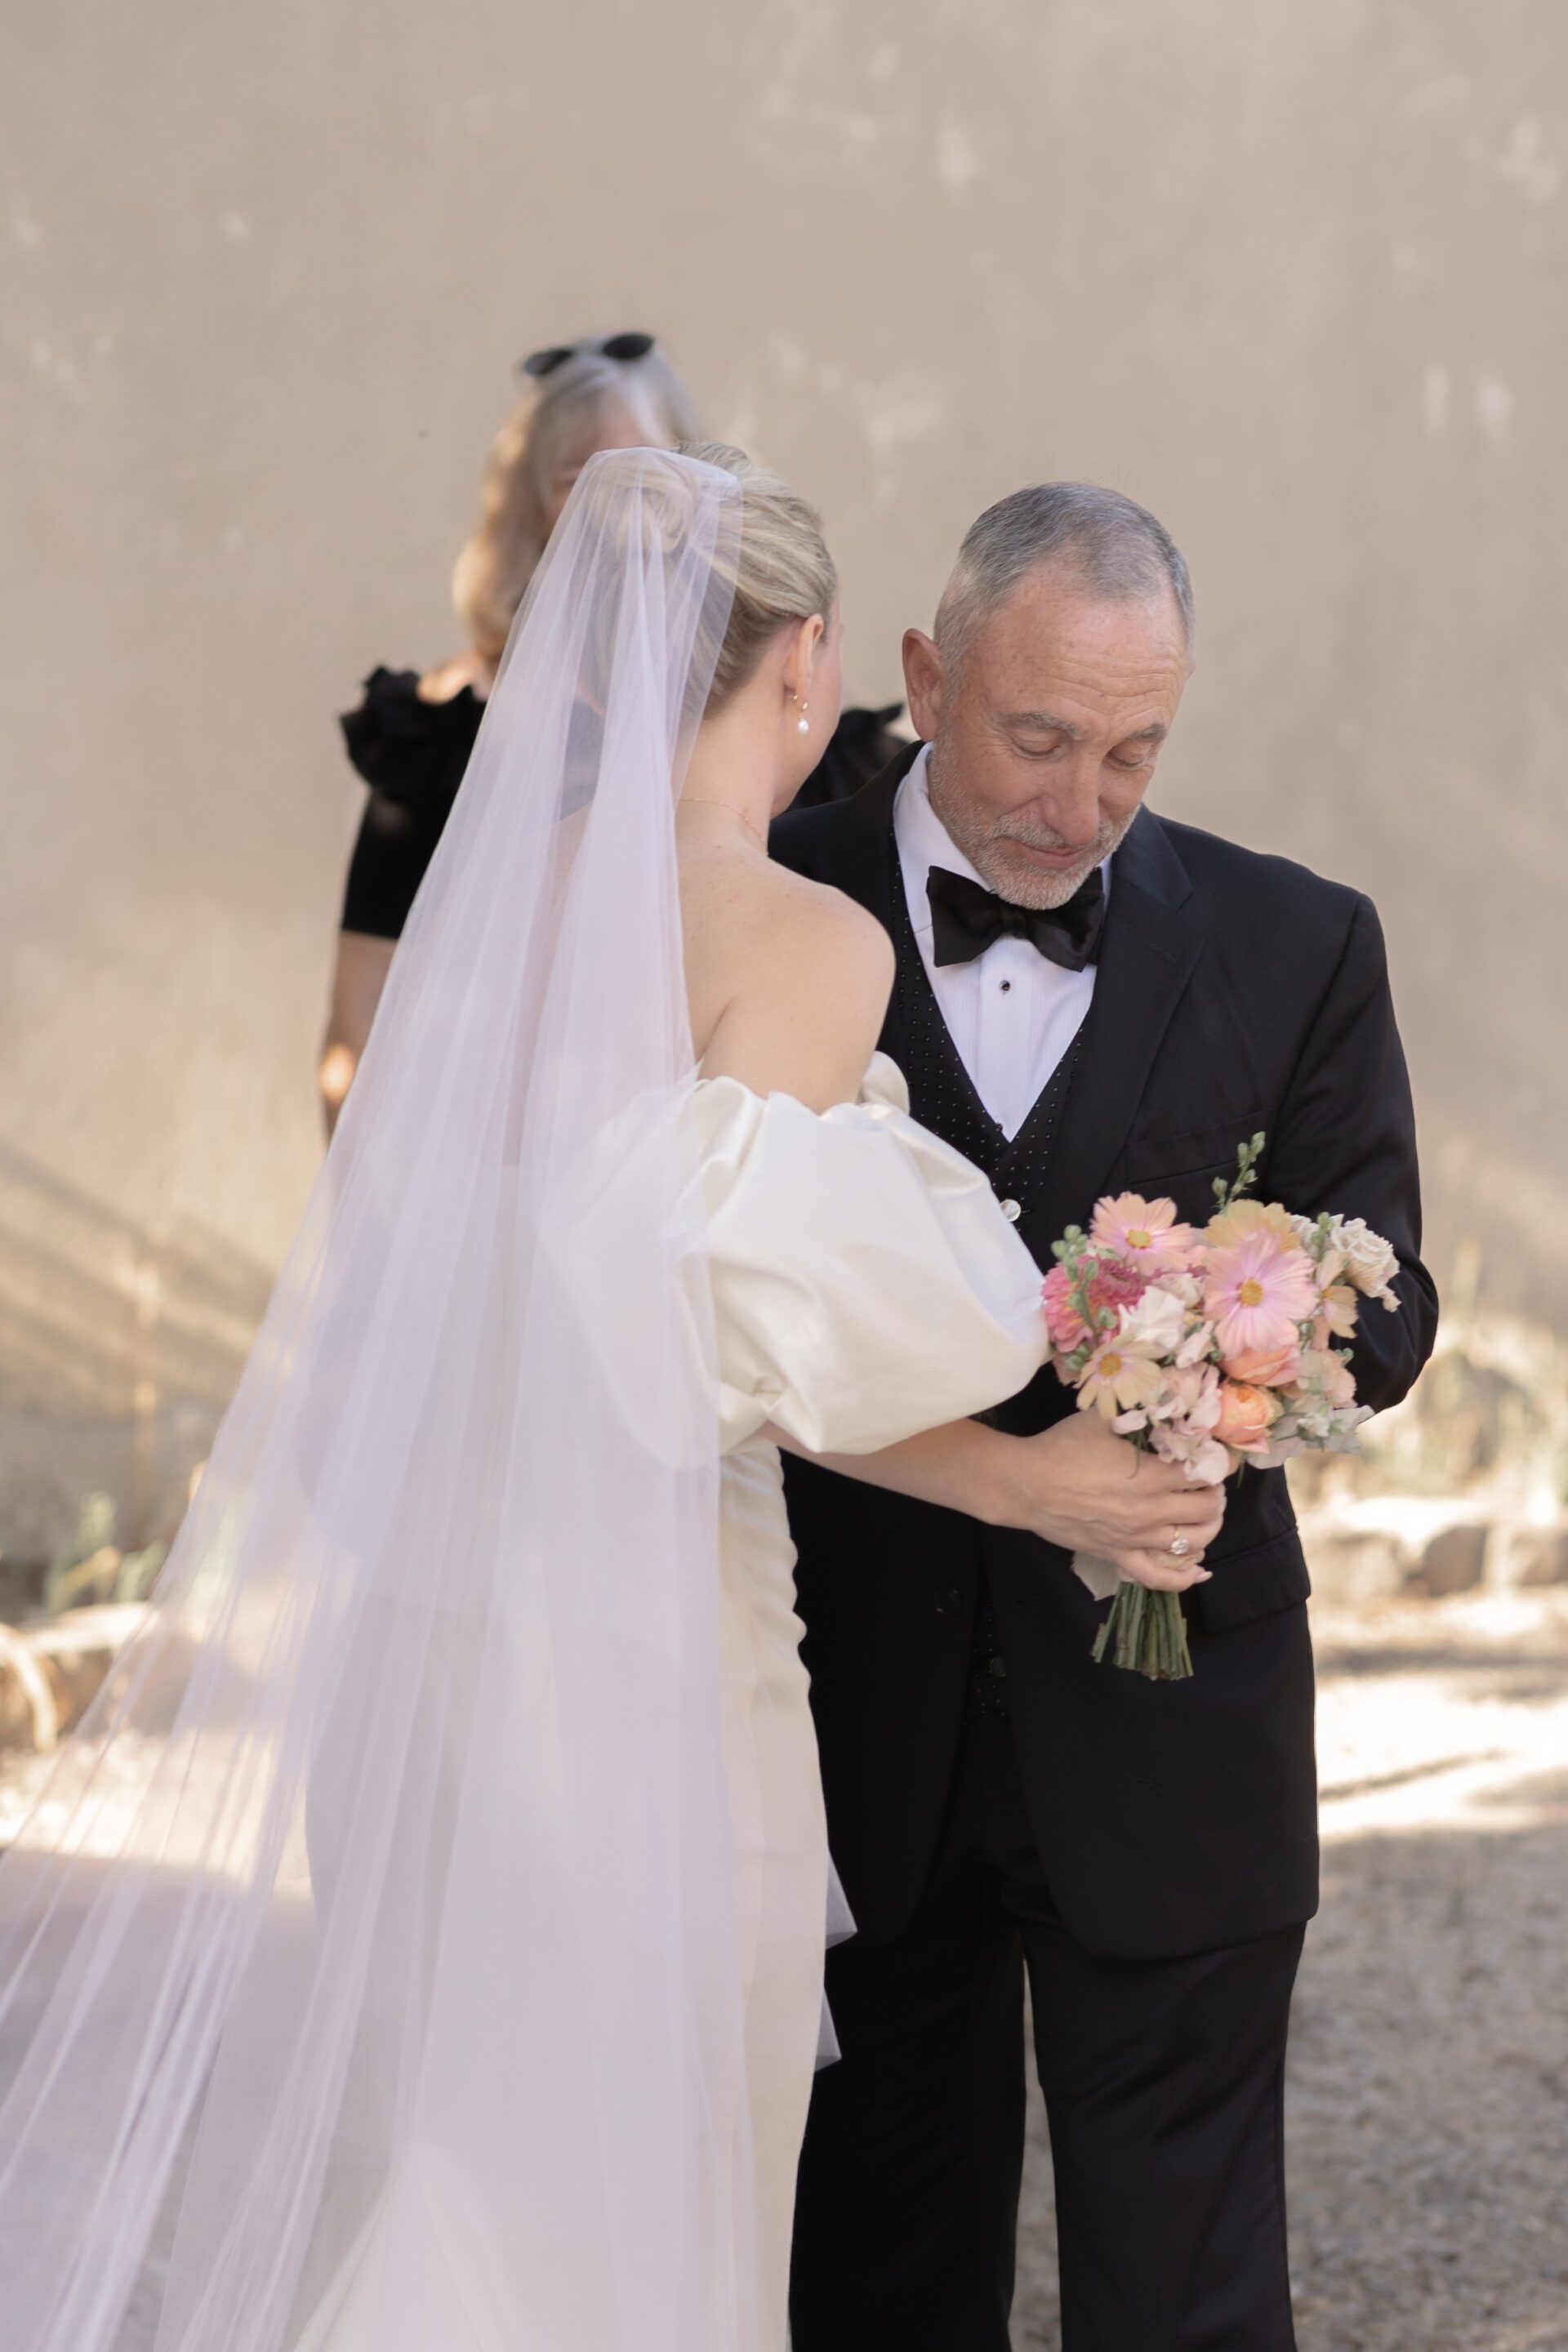 The bride shares an embrace with her father at her Italian wedding